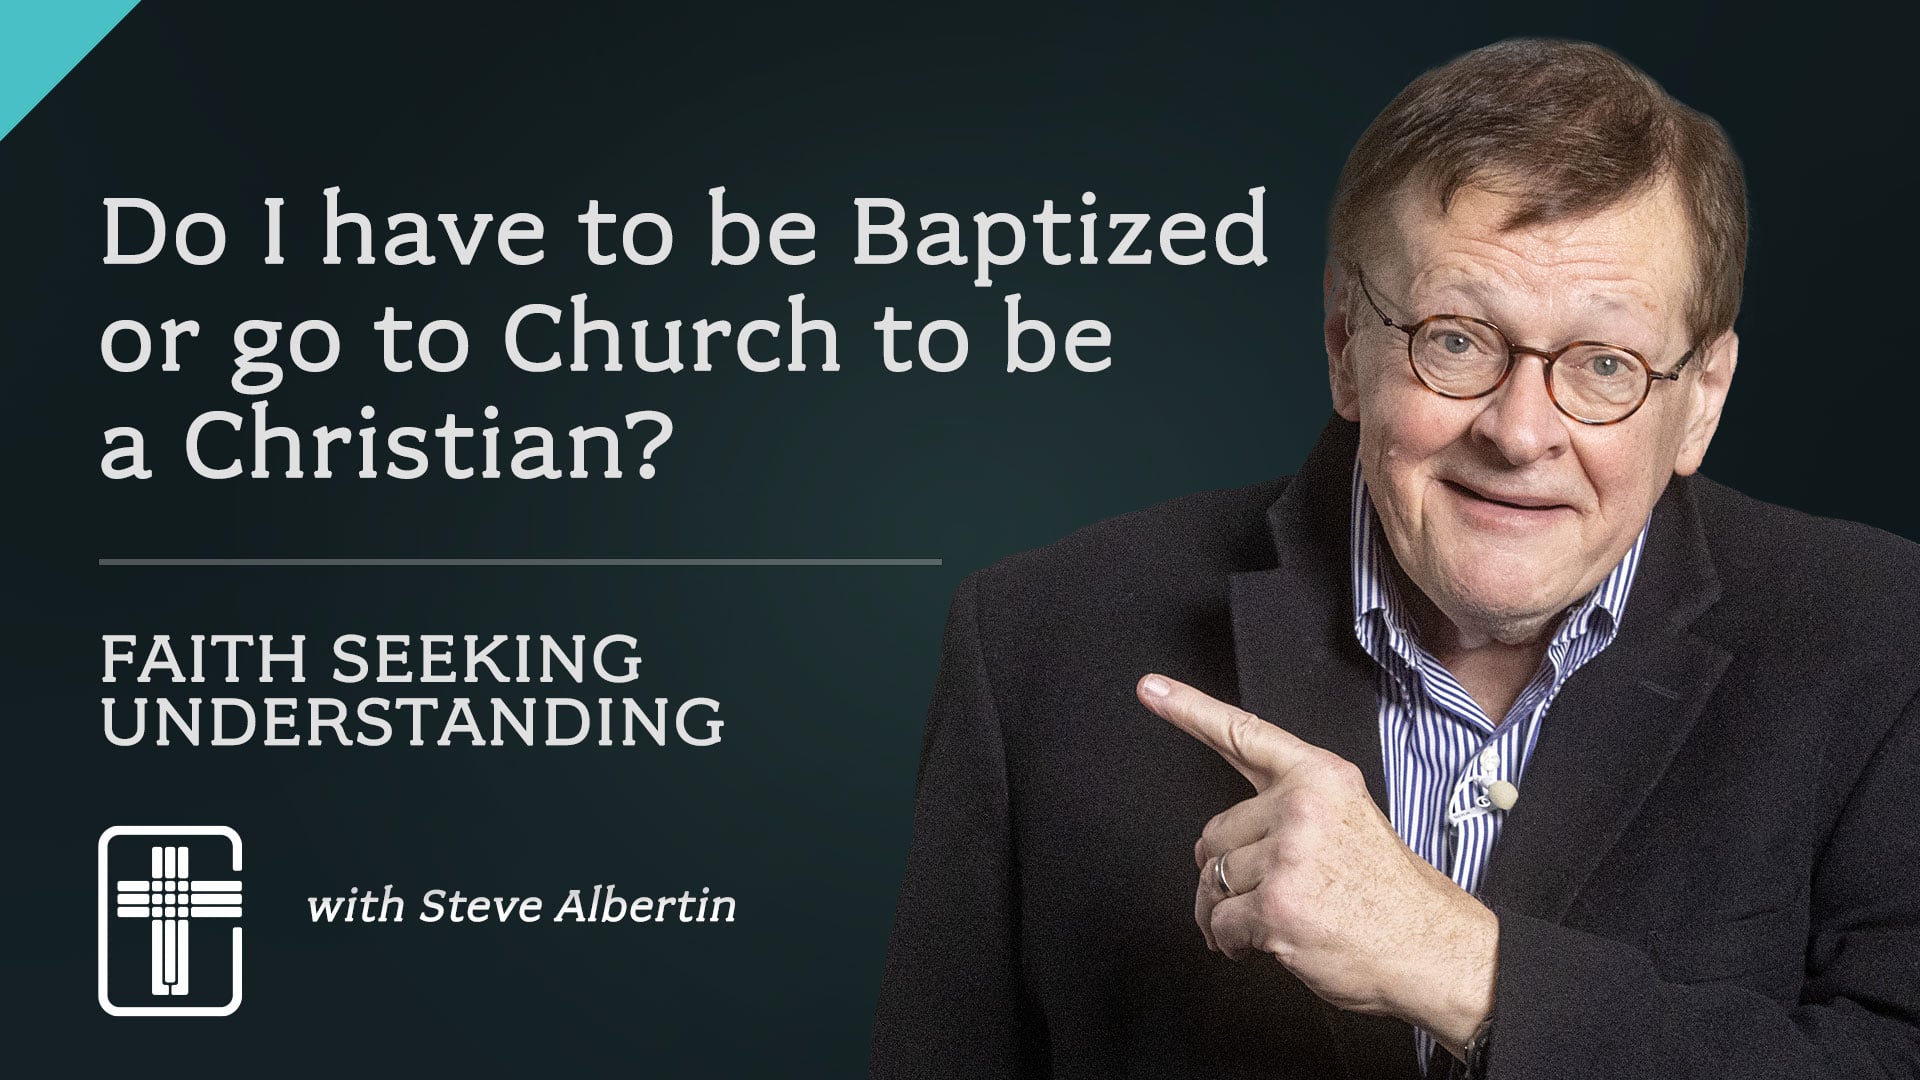 Do I have to be baptized or go to church to be a Christian?